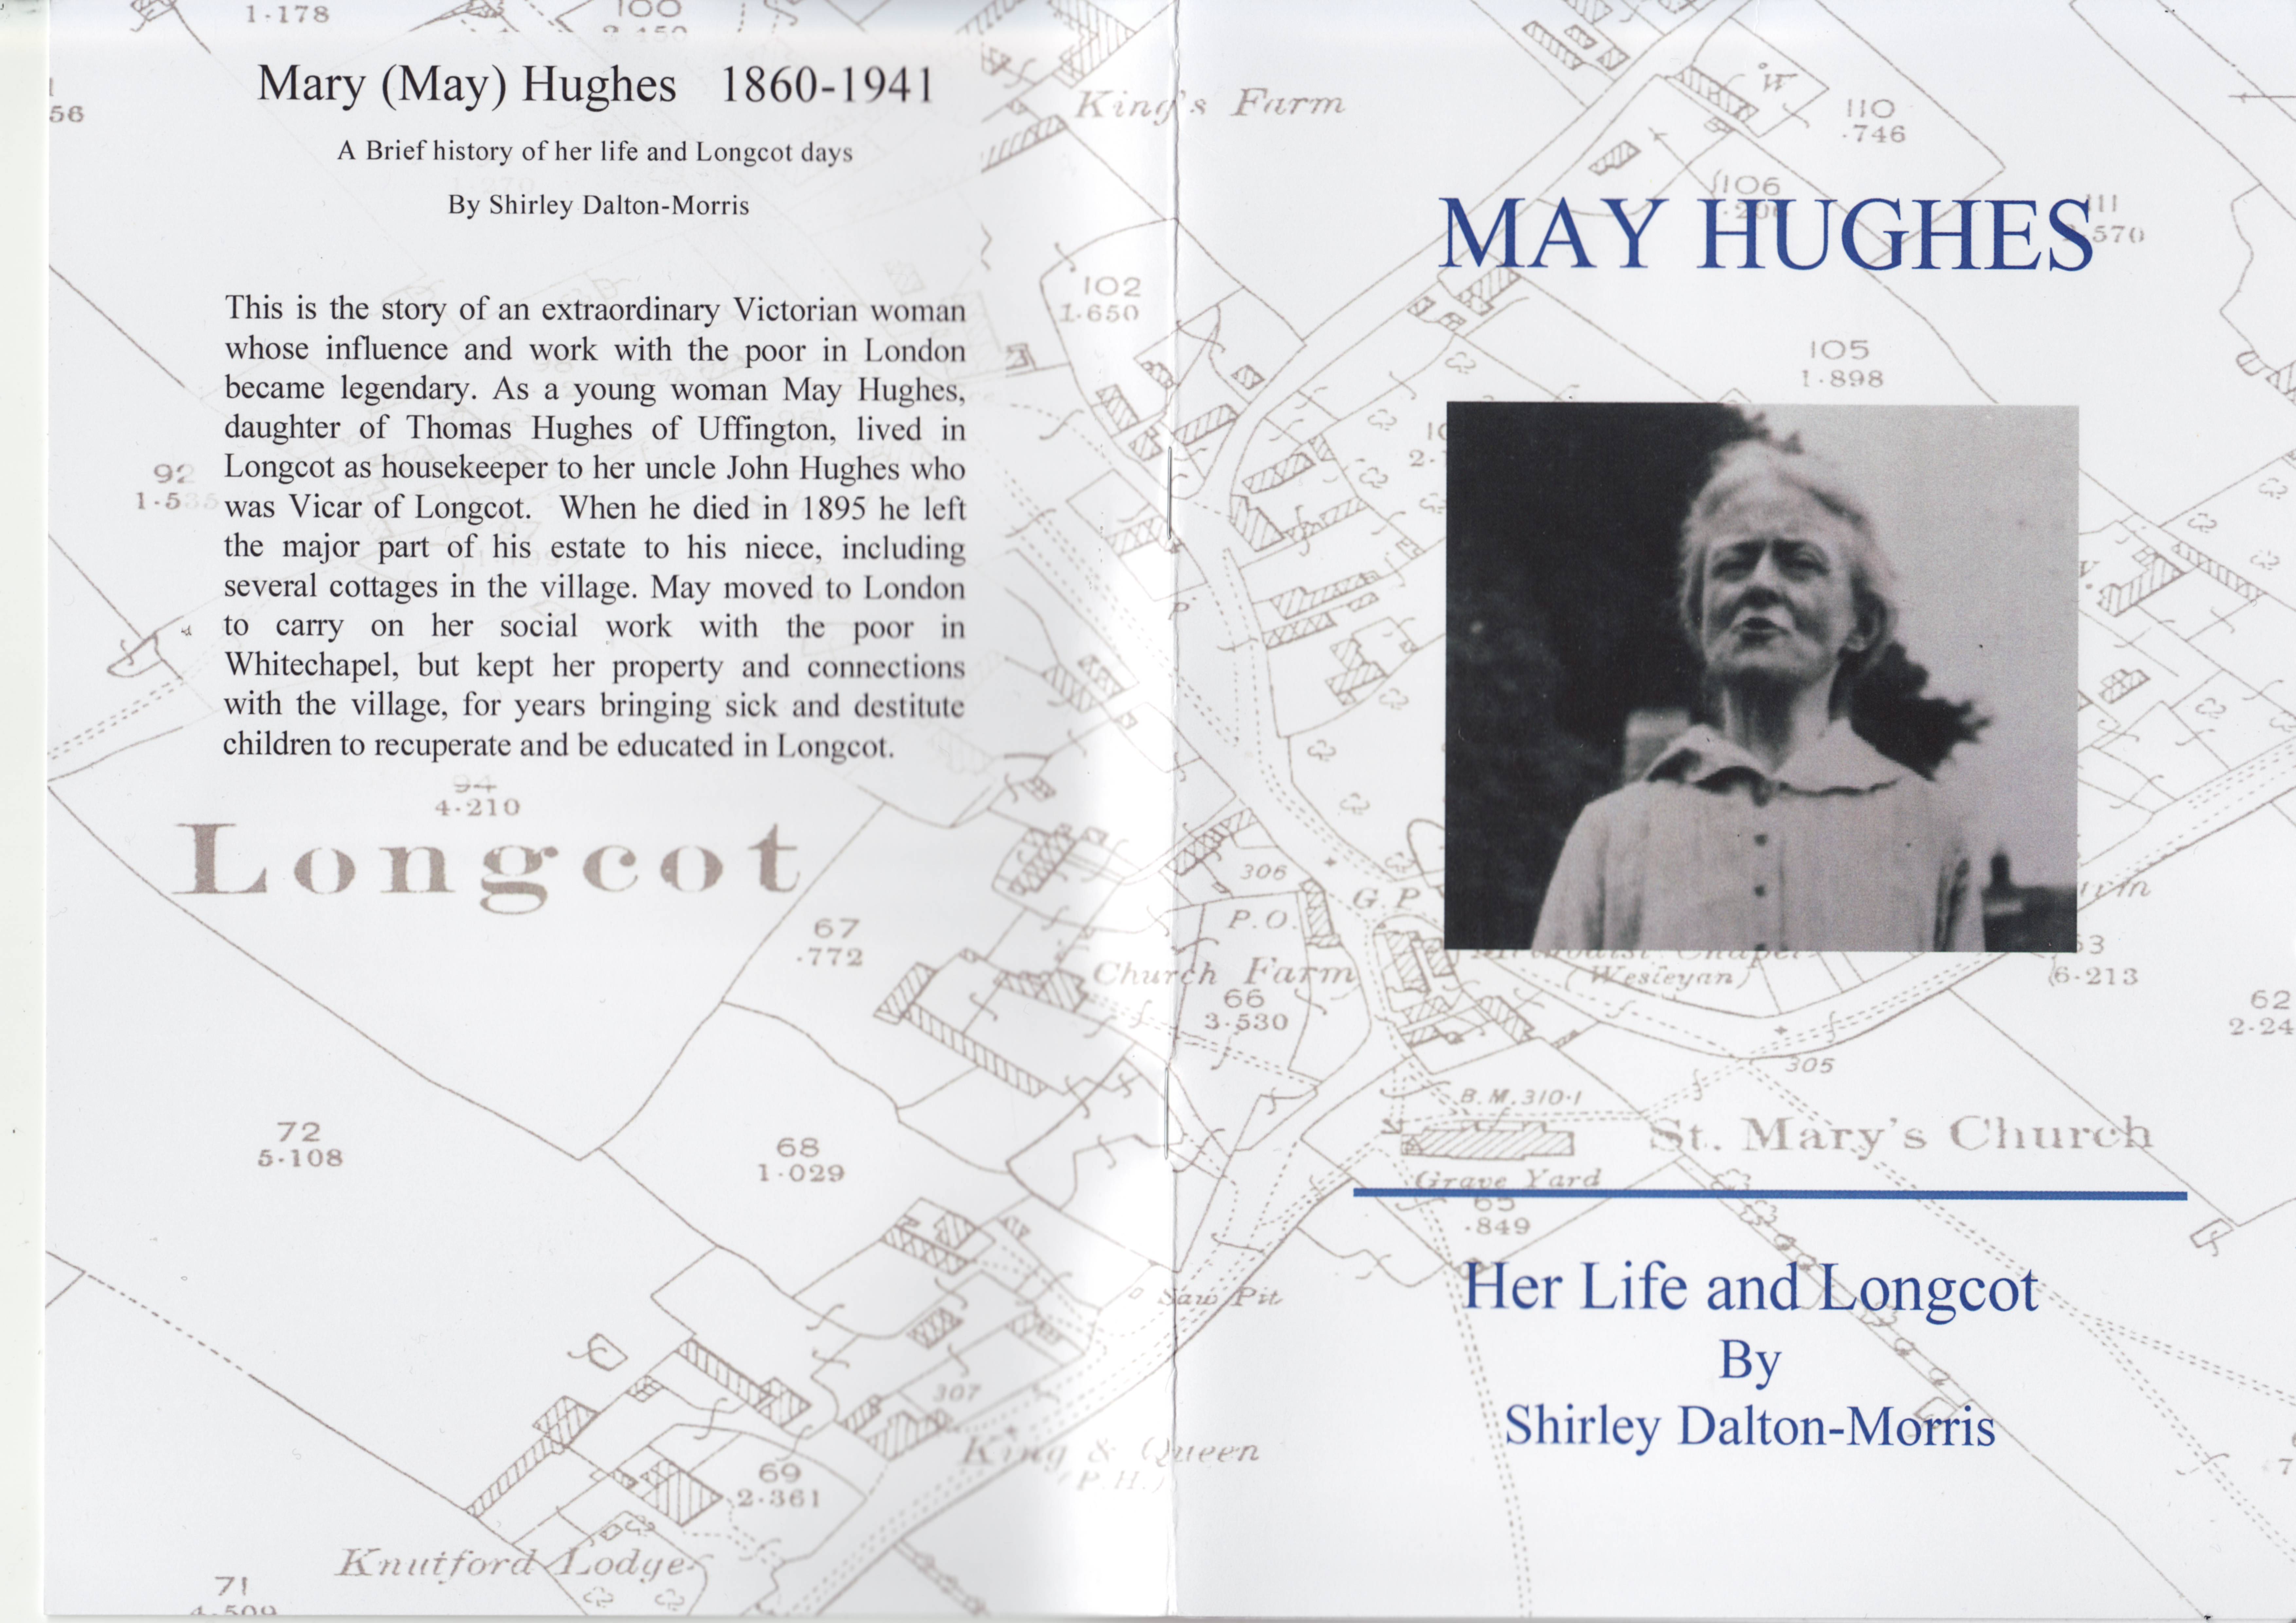 Front & rear cover of the booklet